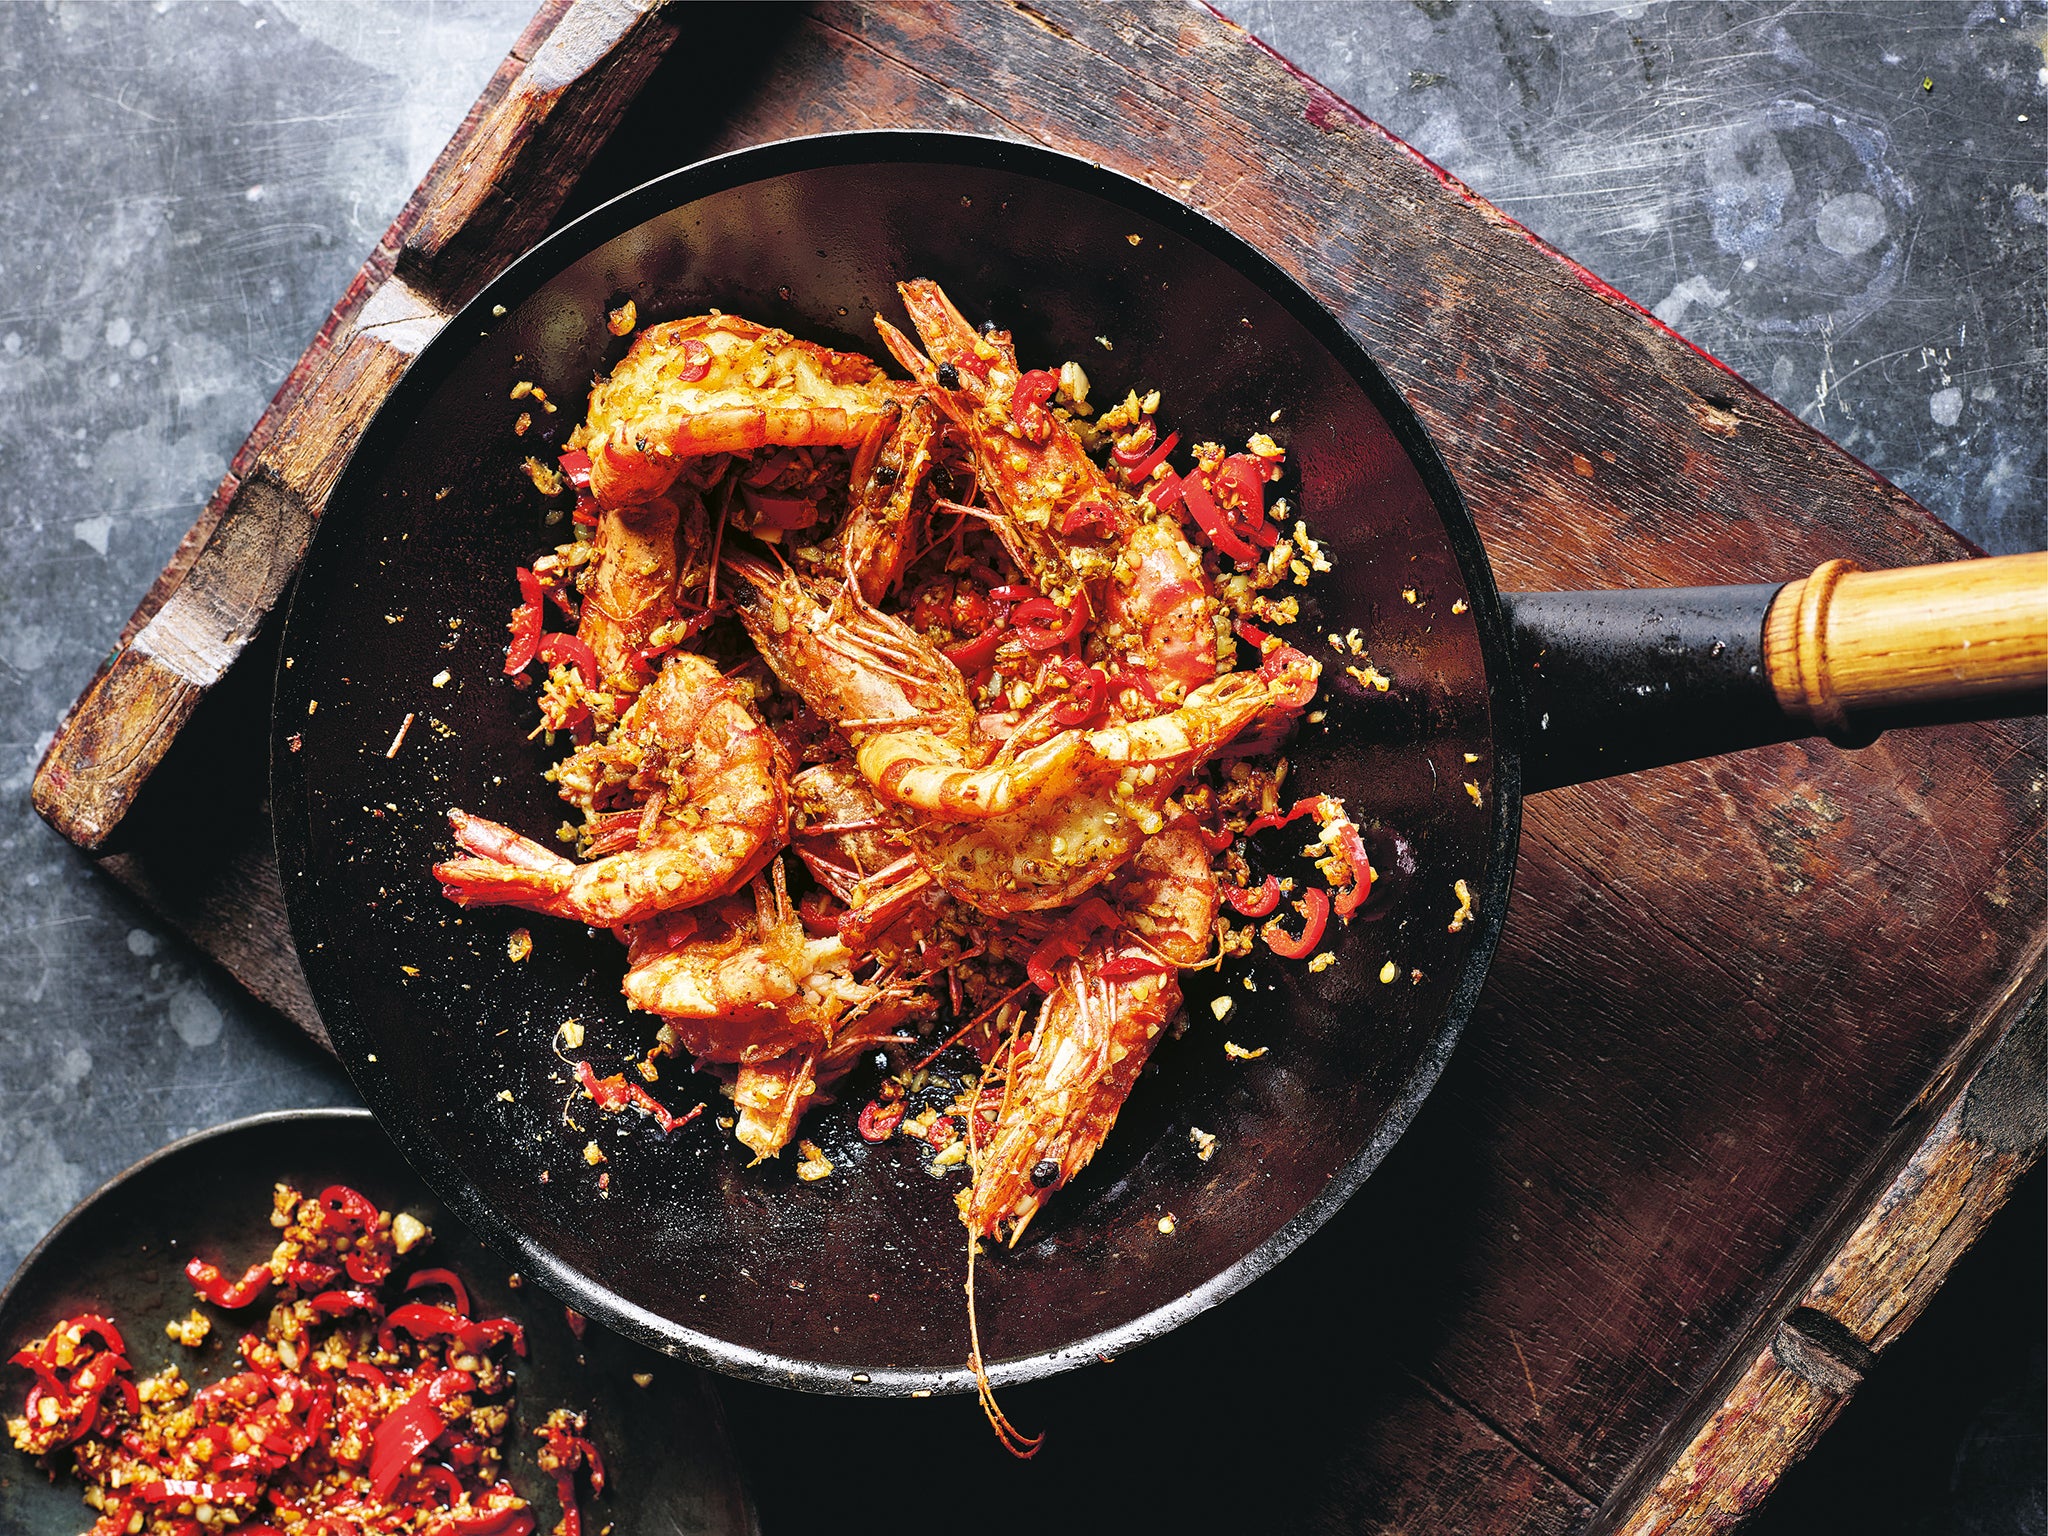 These spicy, salty prawns are a quick and easy midweek dinner